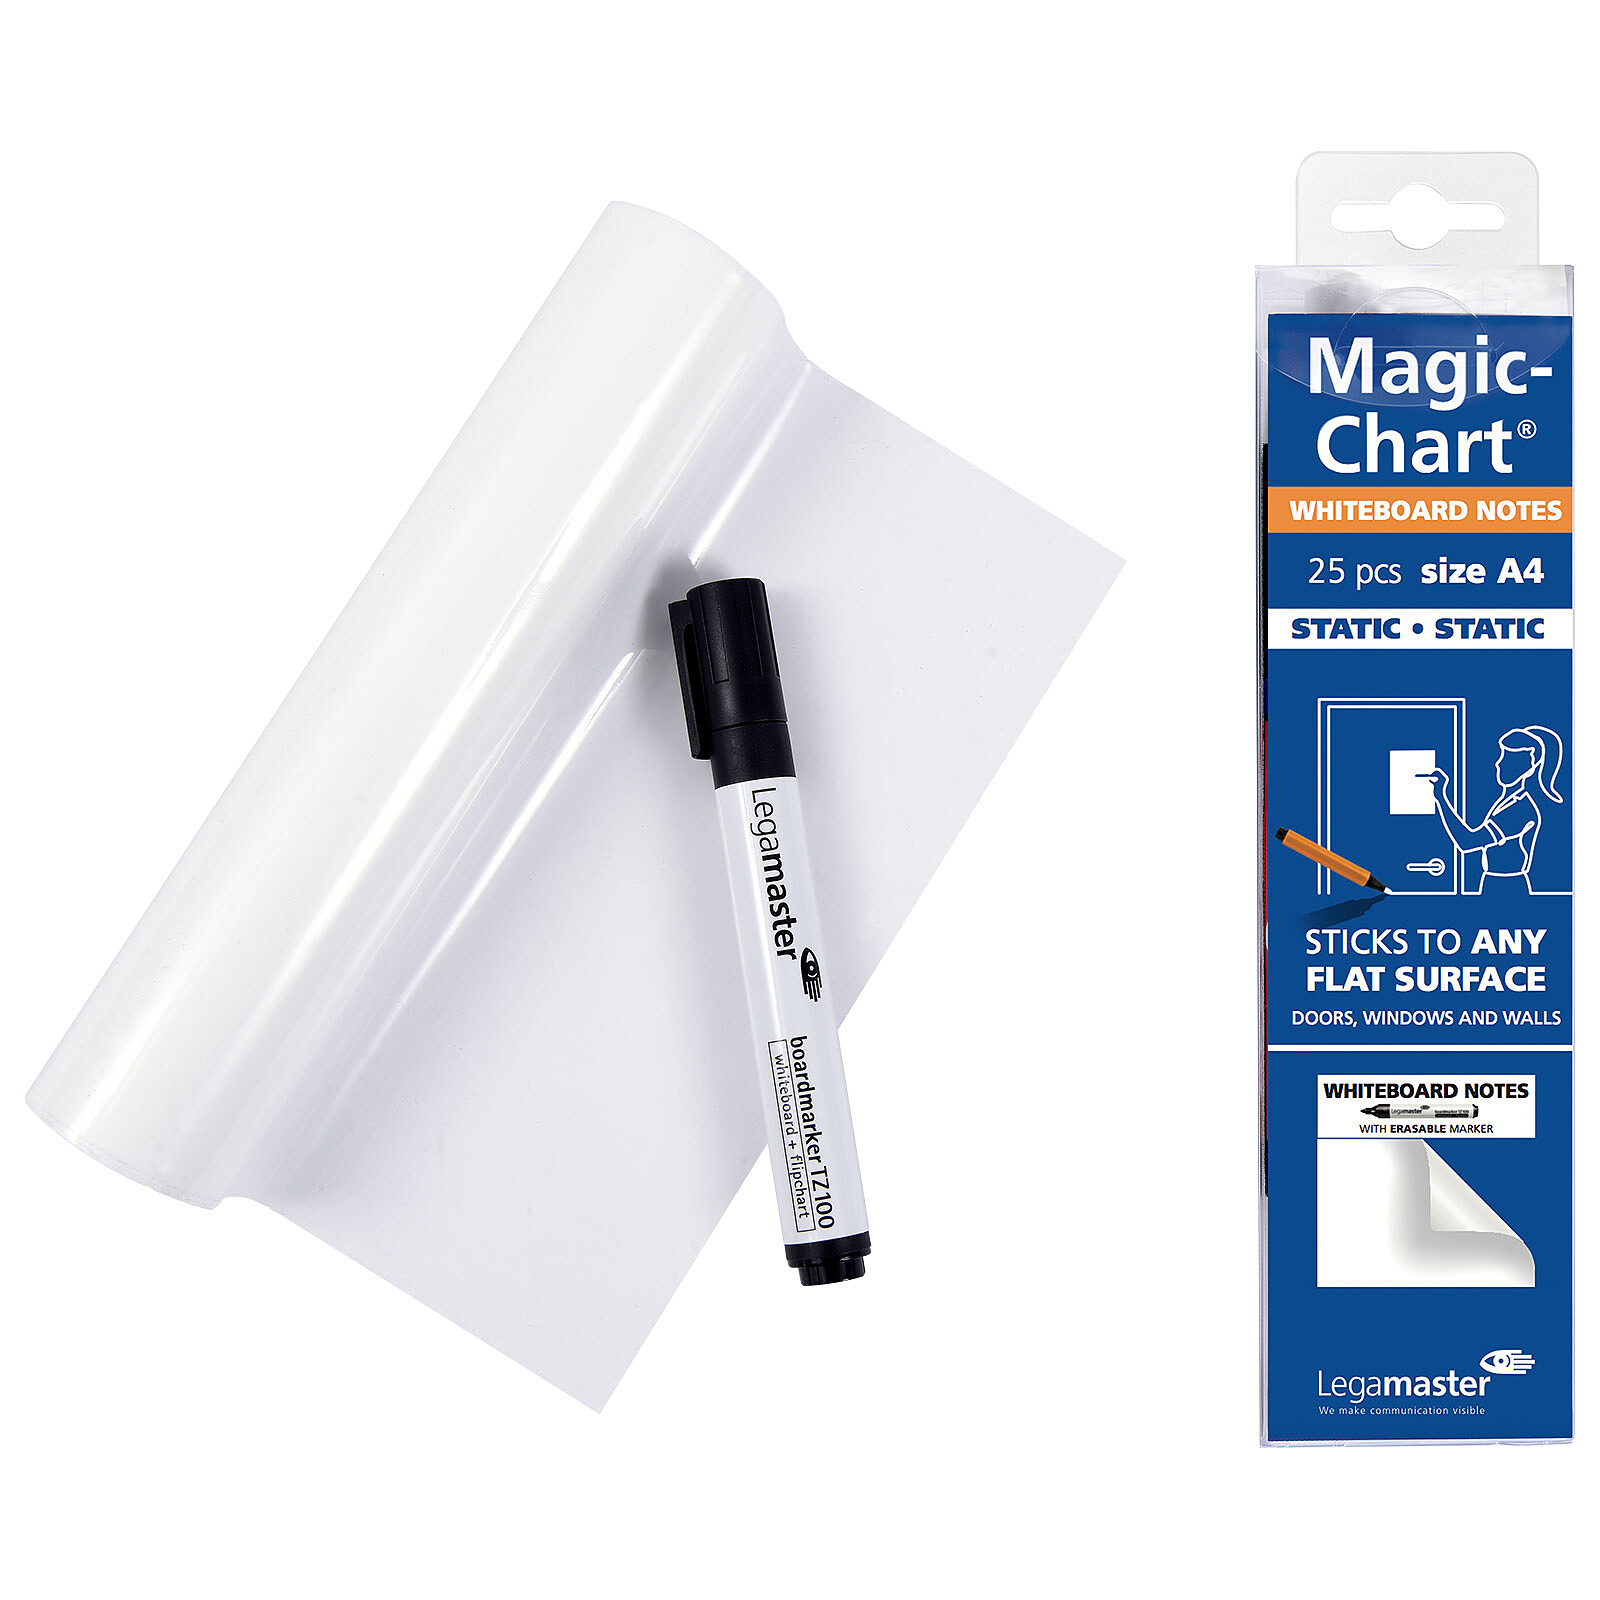 Legamaster Magic-Chart Whiteboard Notes A4 - Tableau blanc et